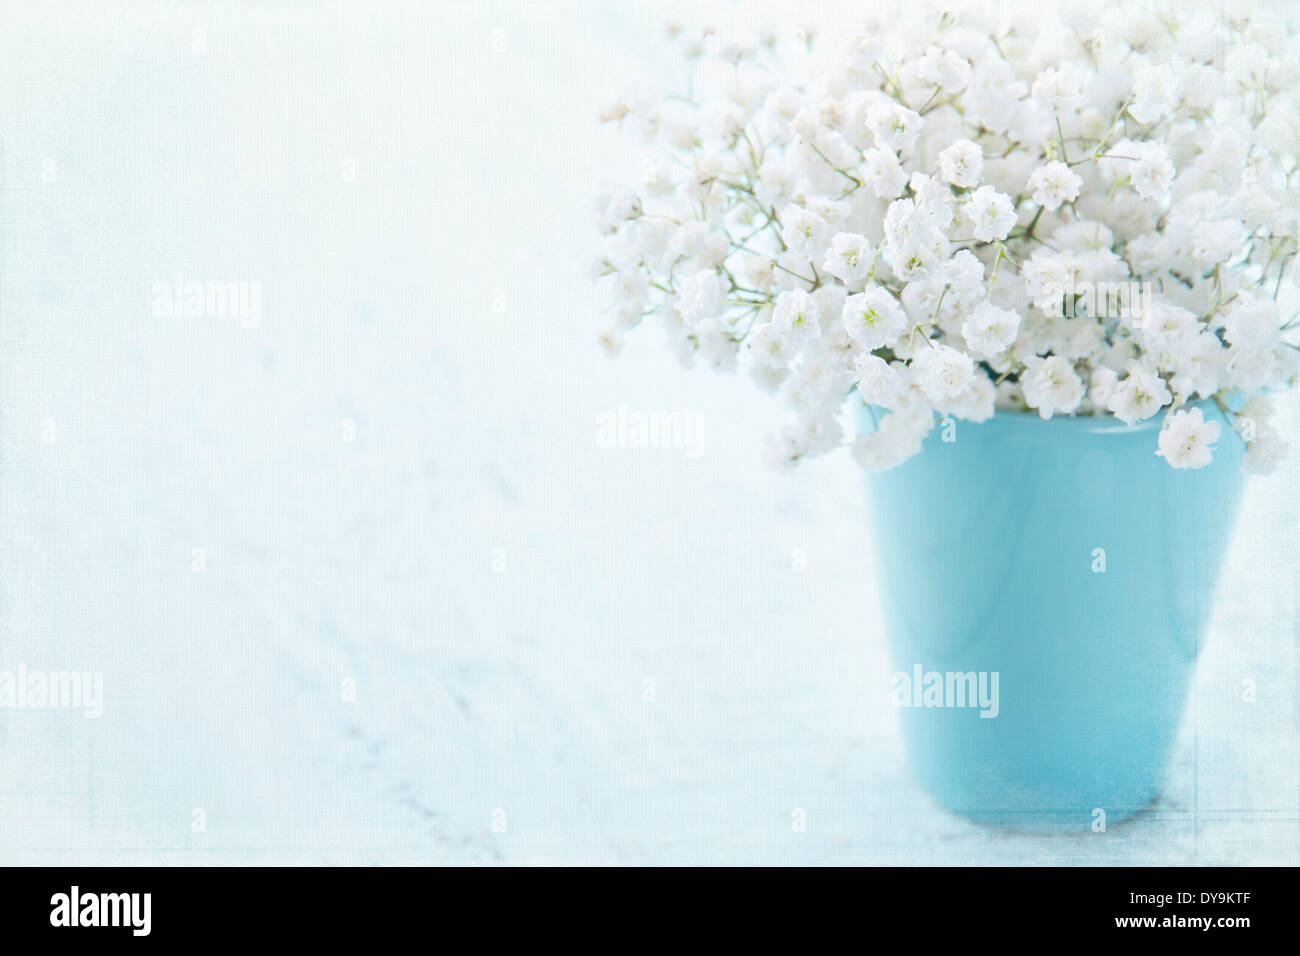 White baby's breath flowers in a vase on light blue textured vintage background Stock Photo